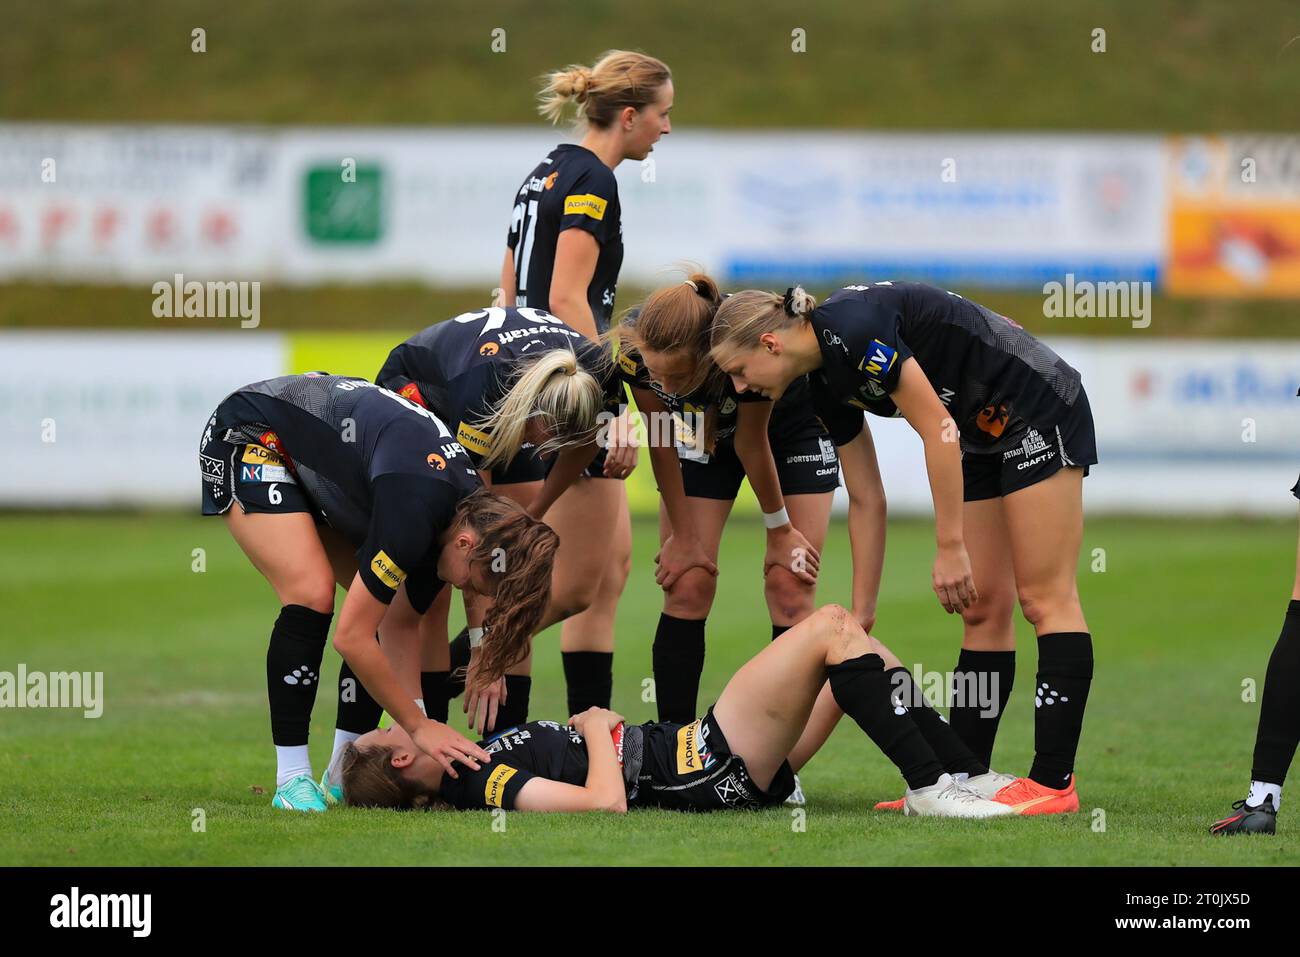 Neulengbach players checking on their injured colleague during the Admiral Frauen Bundesliga match Neulengbach vs Austria Wien at Wienerwald Stadion (Tom Seiss/ SPP) Credit: SPP Sport Press Photo. /Alamy Live News Stock Photo